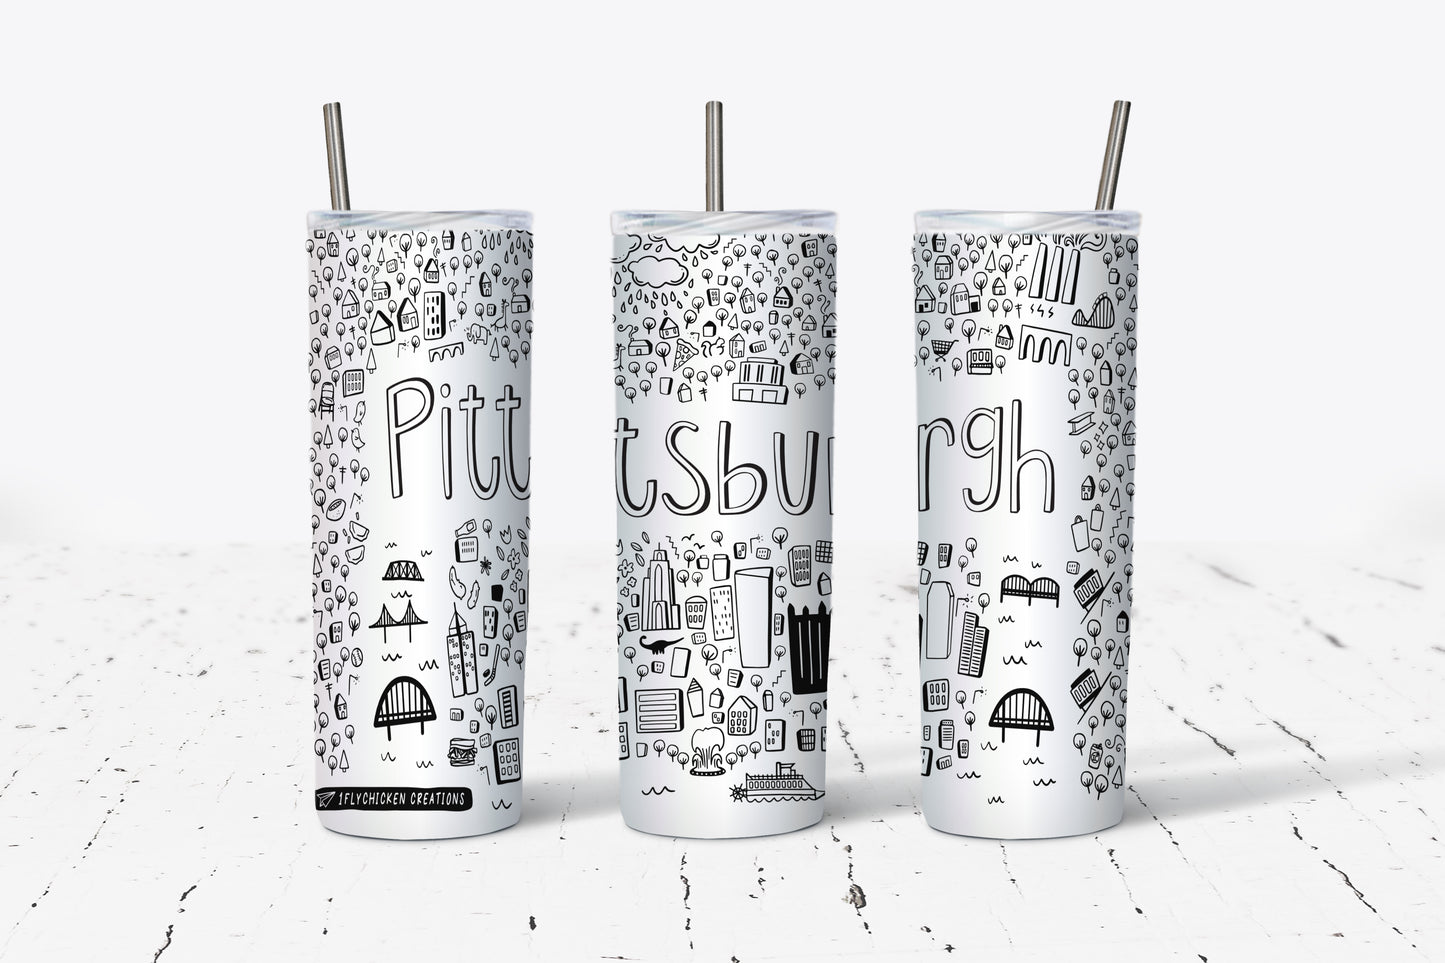 Burgh Bits: Doodle 20 oz Tumbler- Collaboration with 1 Fly Chicken Creations